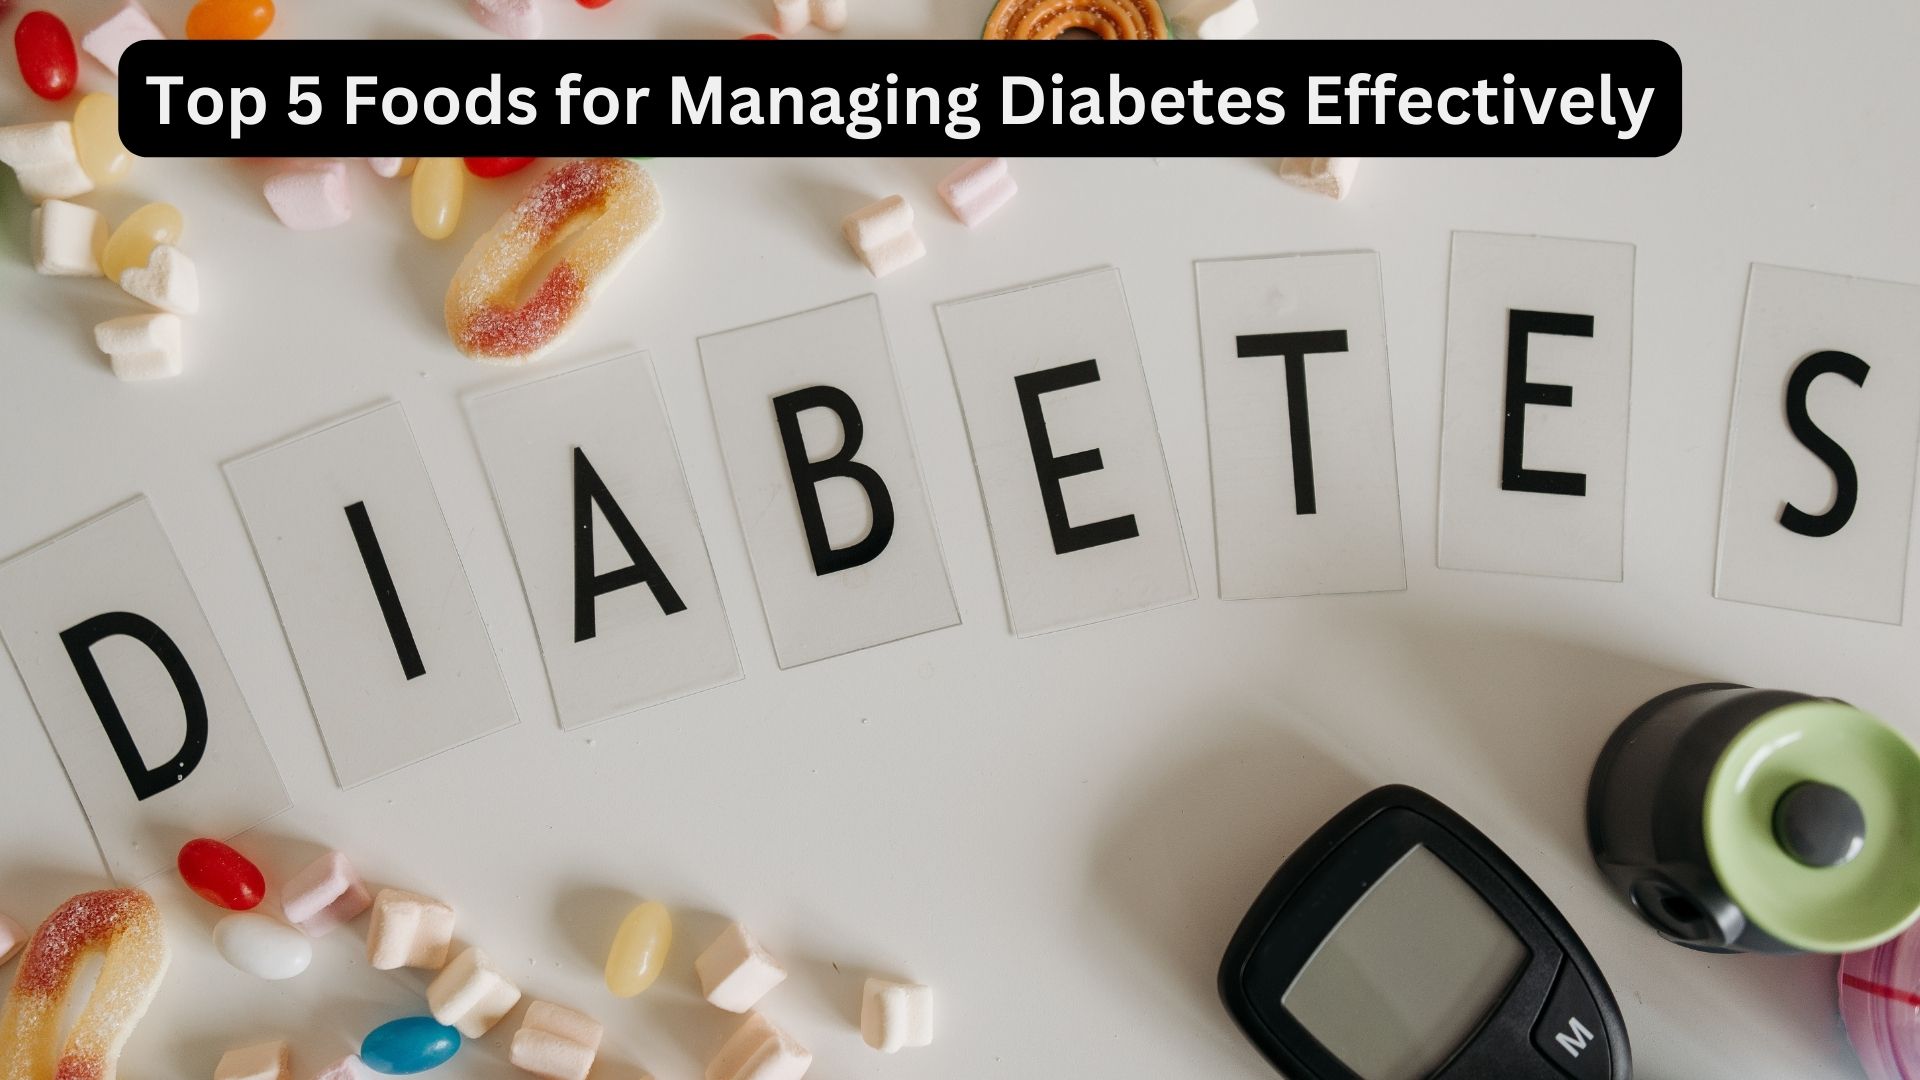 Top 5 Foods for Managing Diabetes Effectively